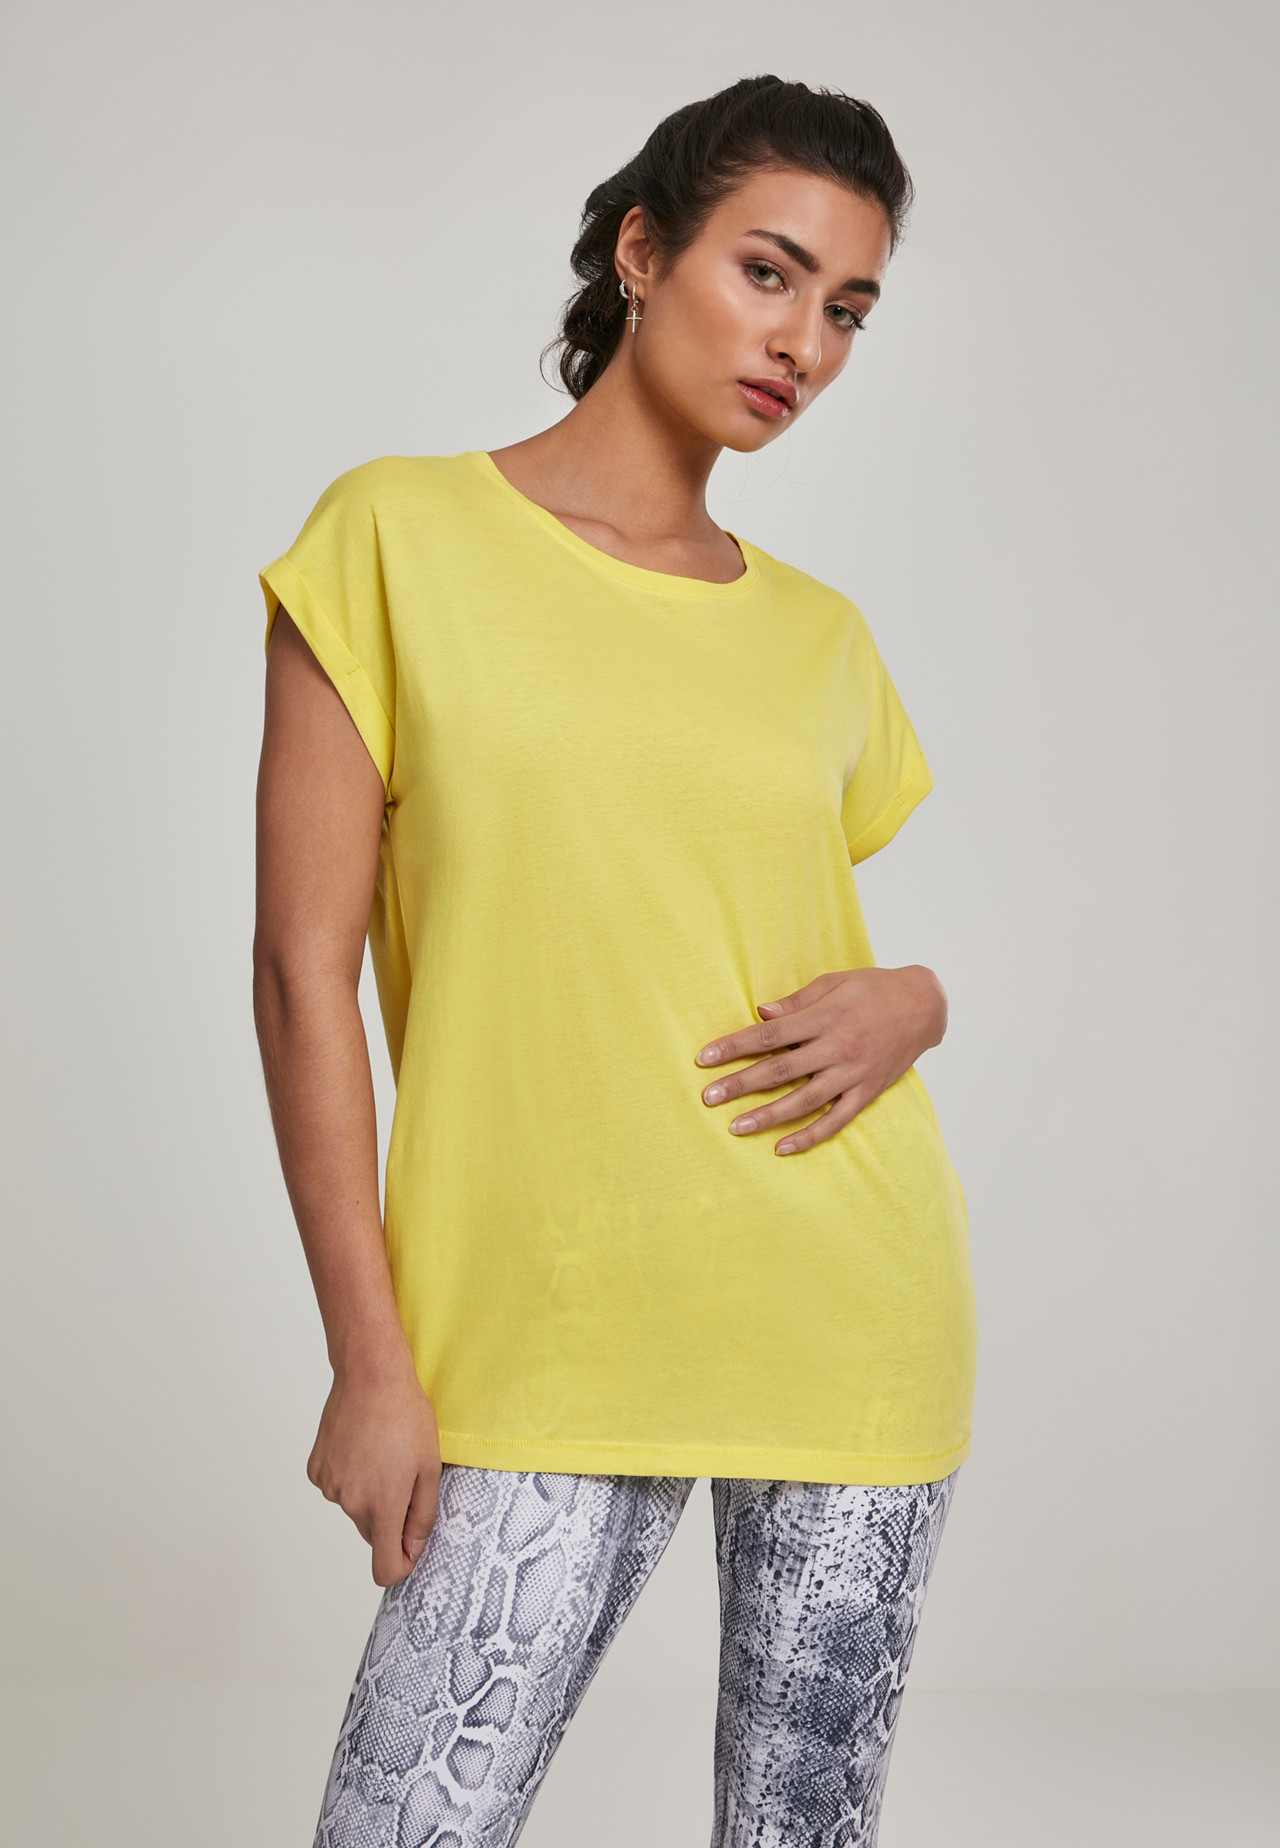 Billede af Urban Classics Ladies Extended Shoulder Tee (Bright Yellow, 4XL)